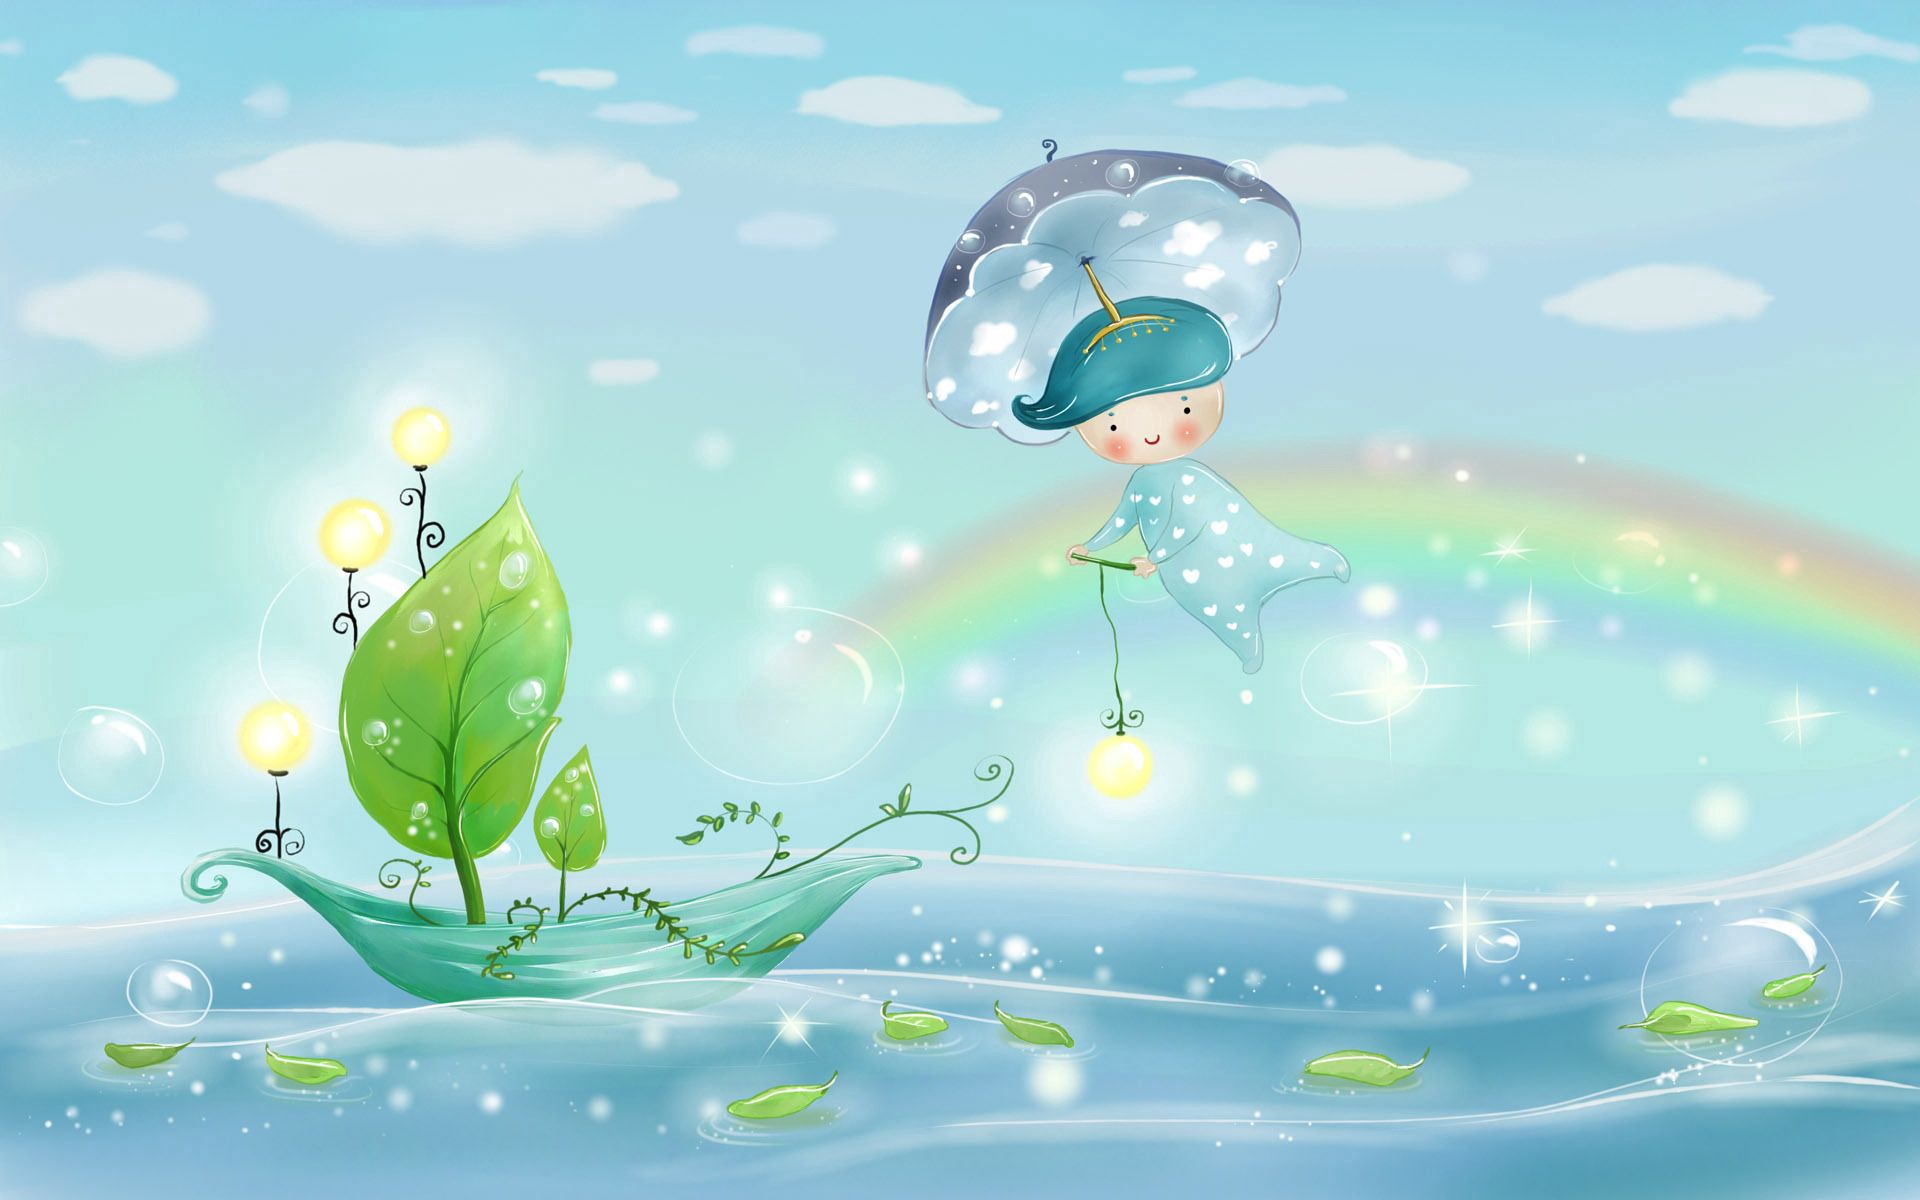 bubbles, drawing, vector, rain, picture, boat, lanterns, nature, water, sky, leaves, sea, clouds, rainbow, lights, shine, light, sail, umbrella, boy, weather Free Stock Photo